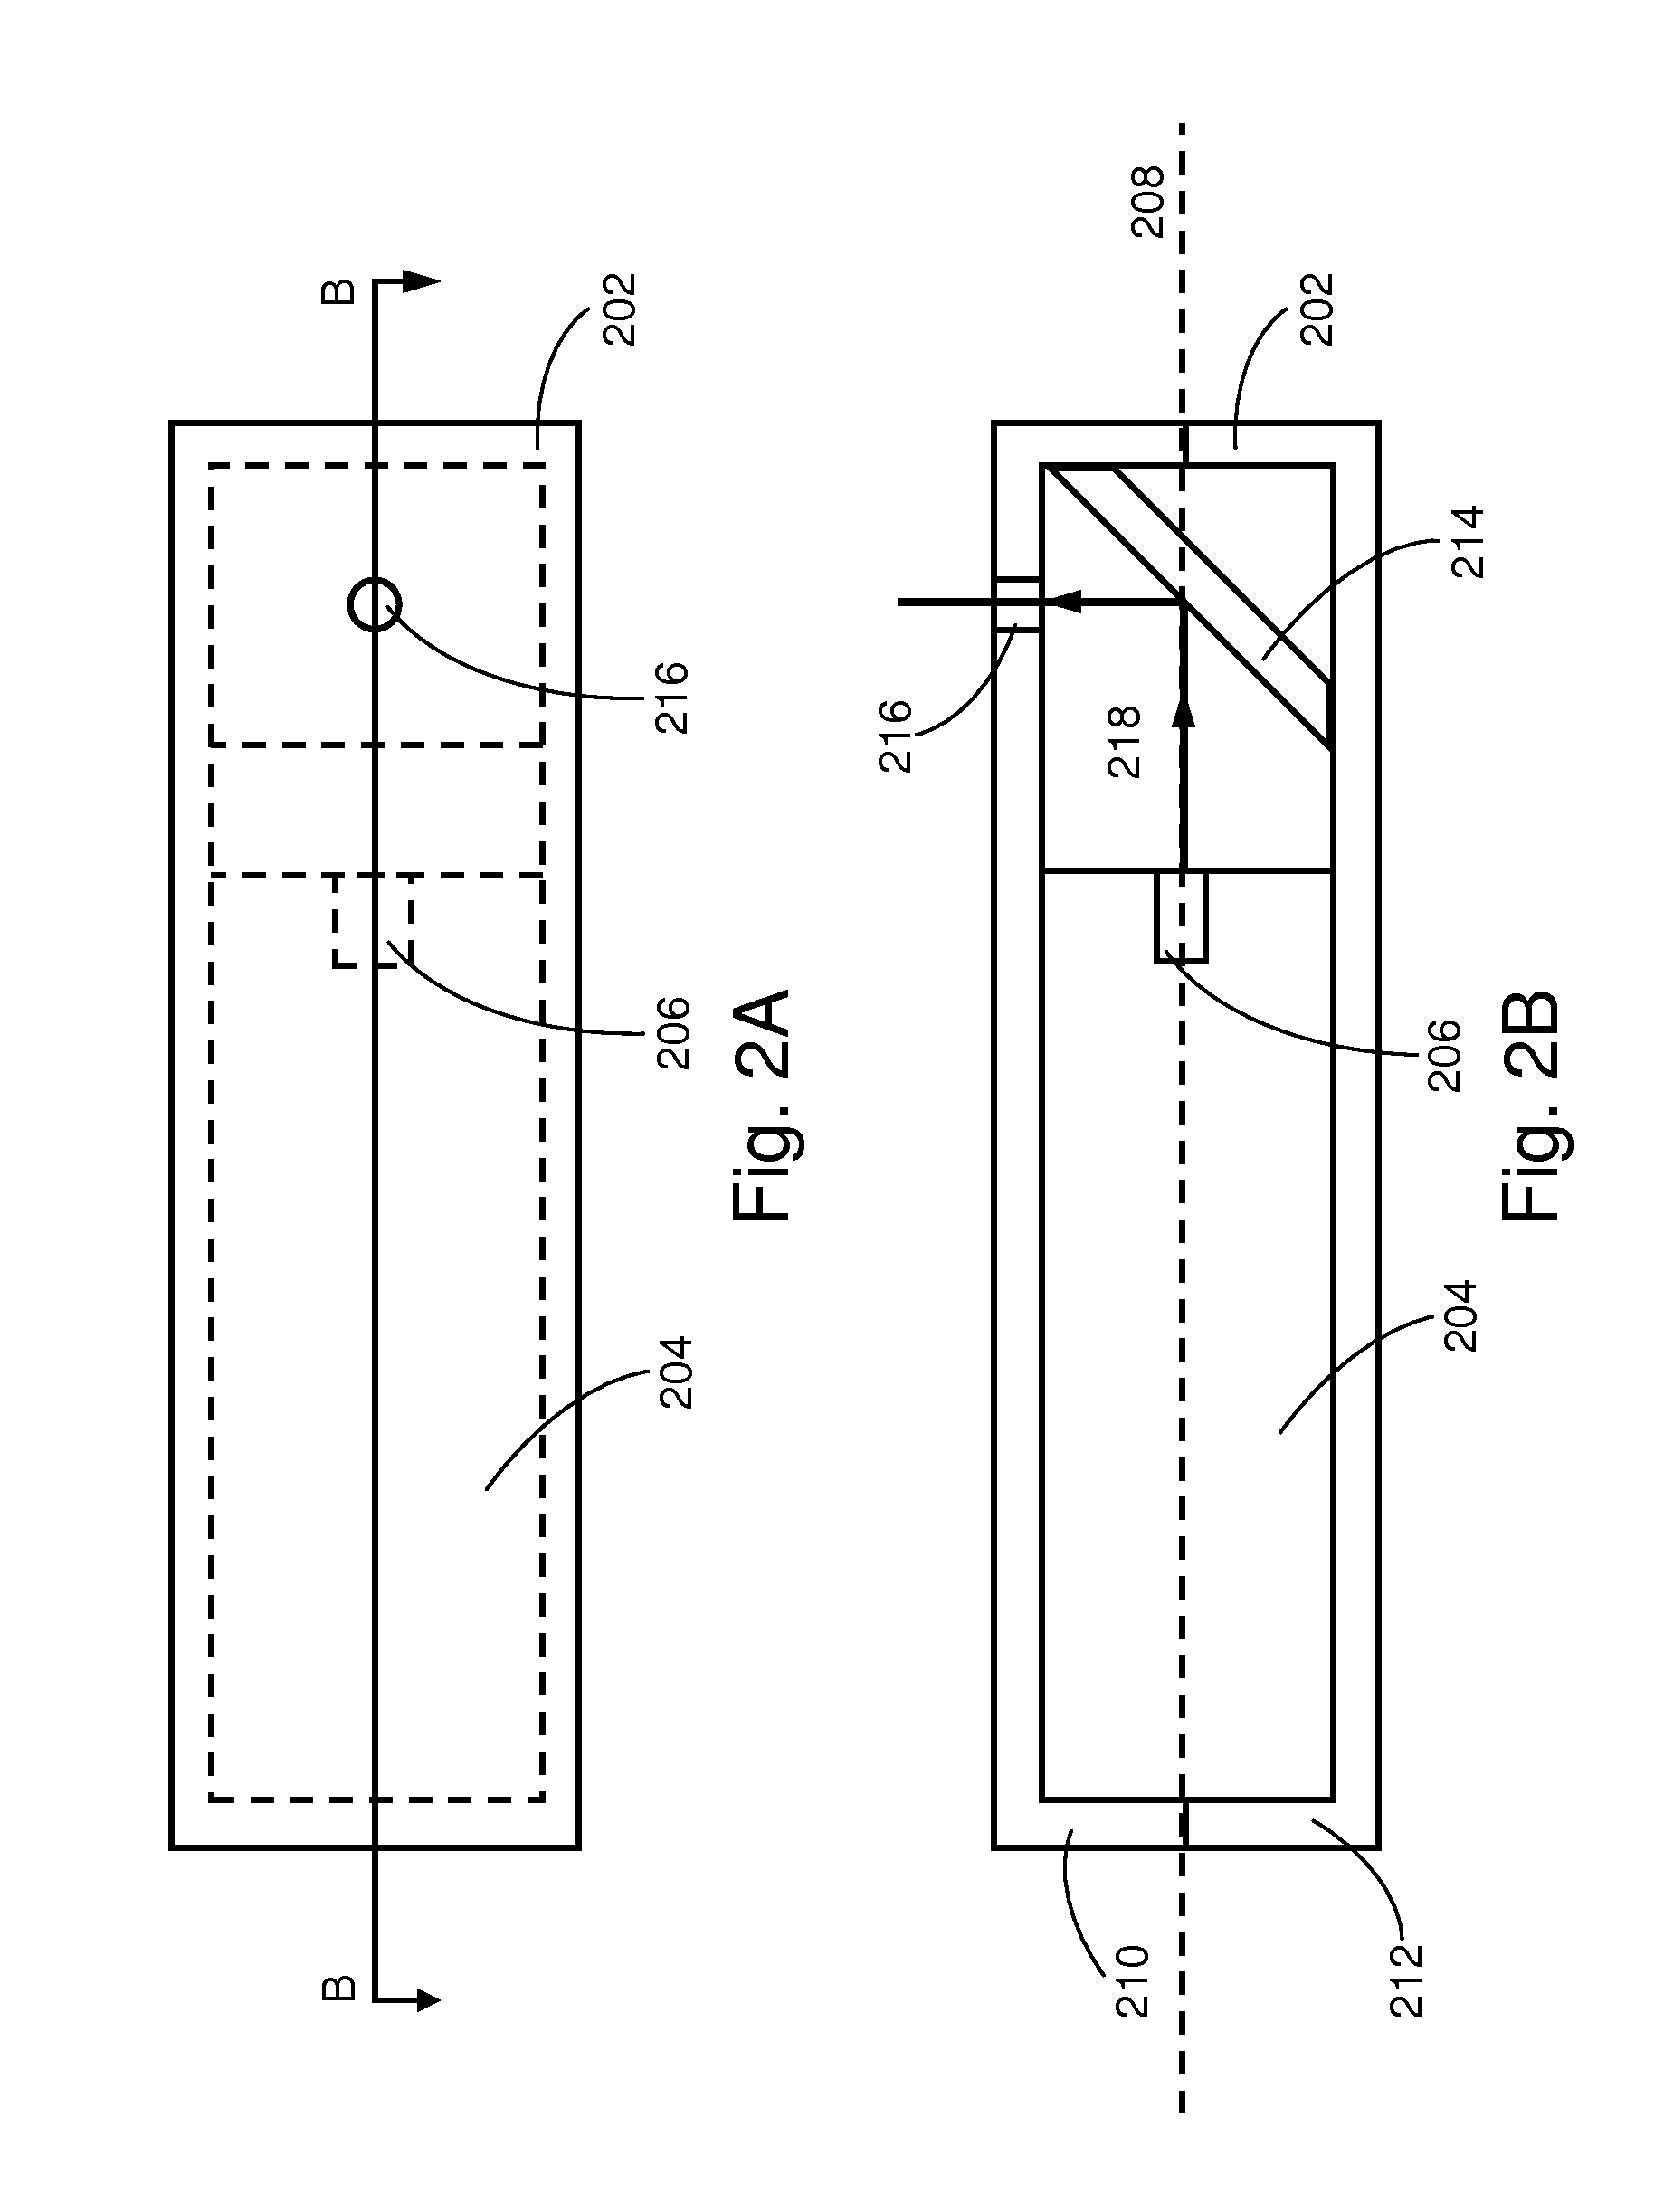 Casing for enclosing electronic device